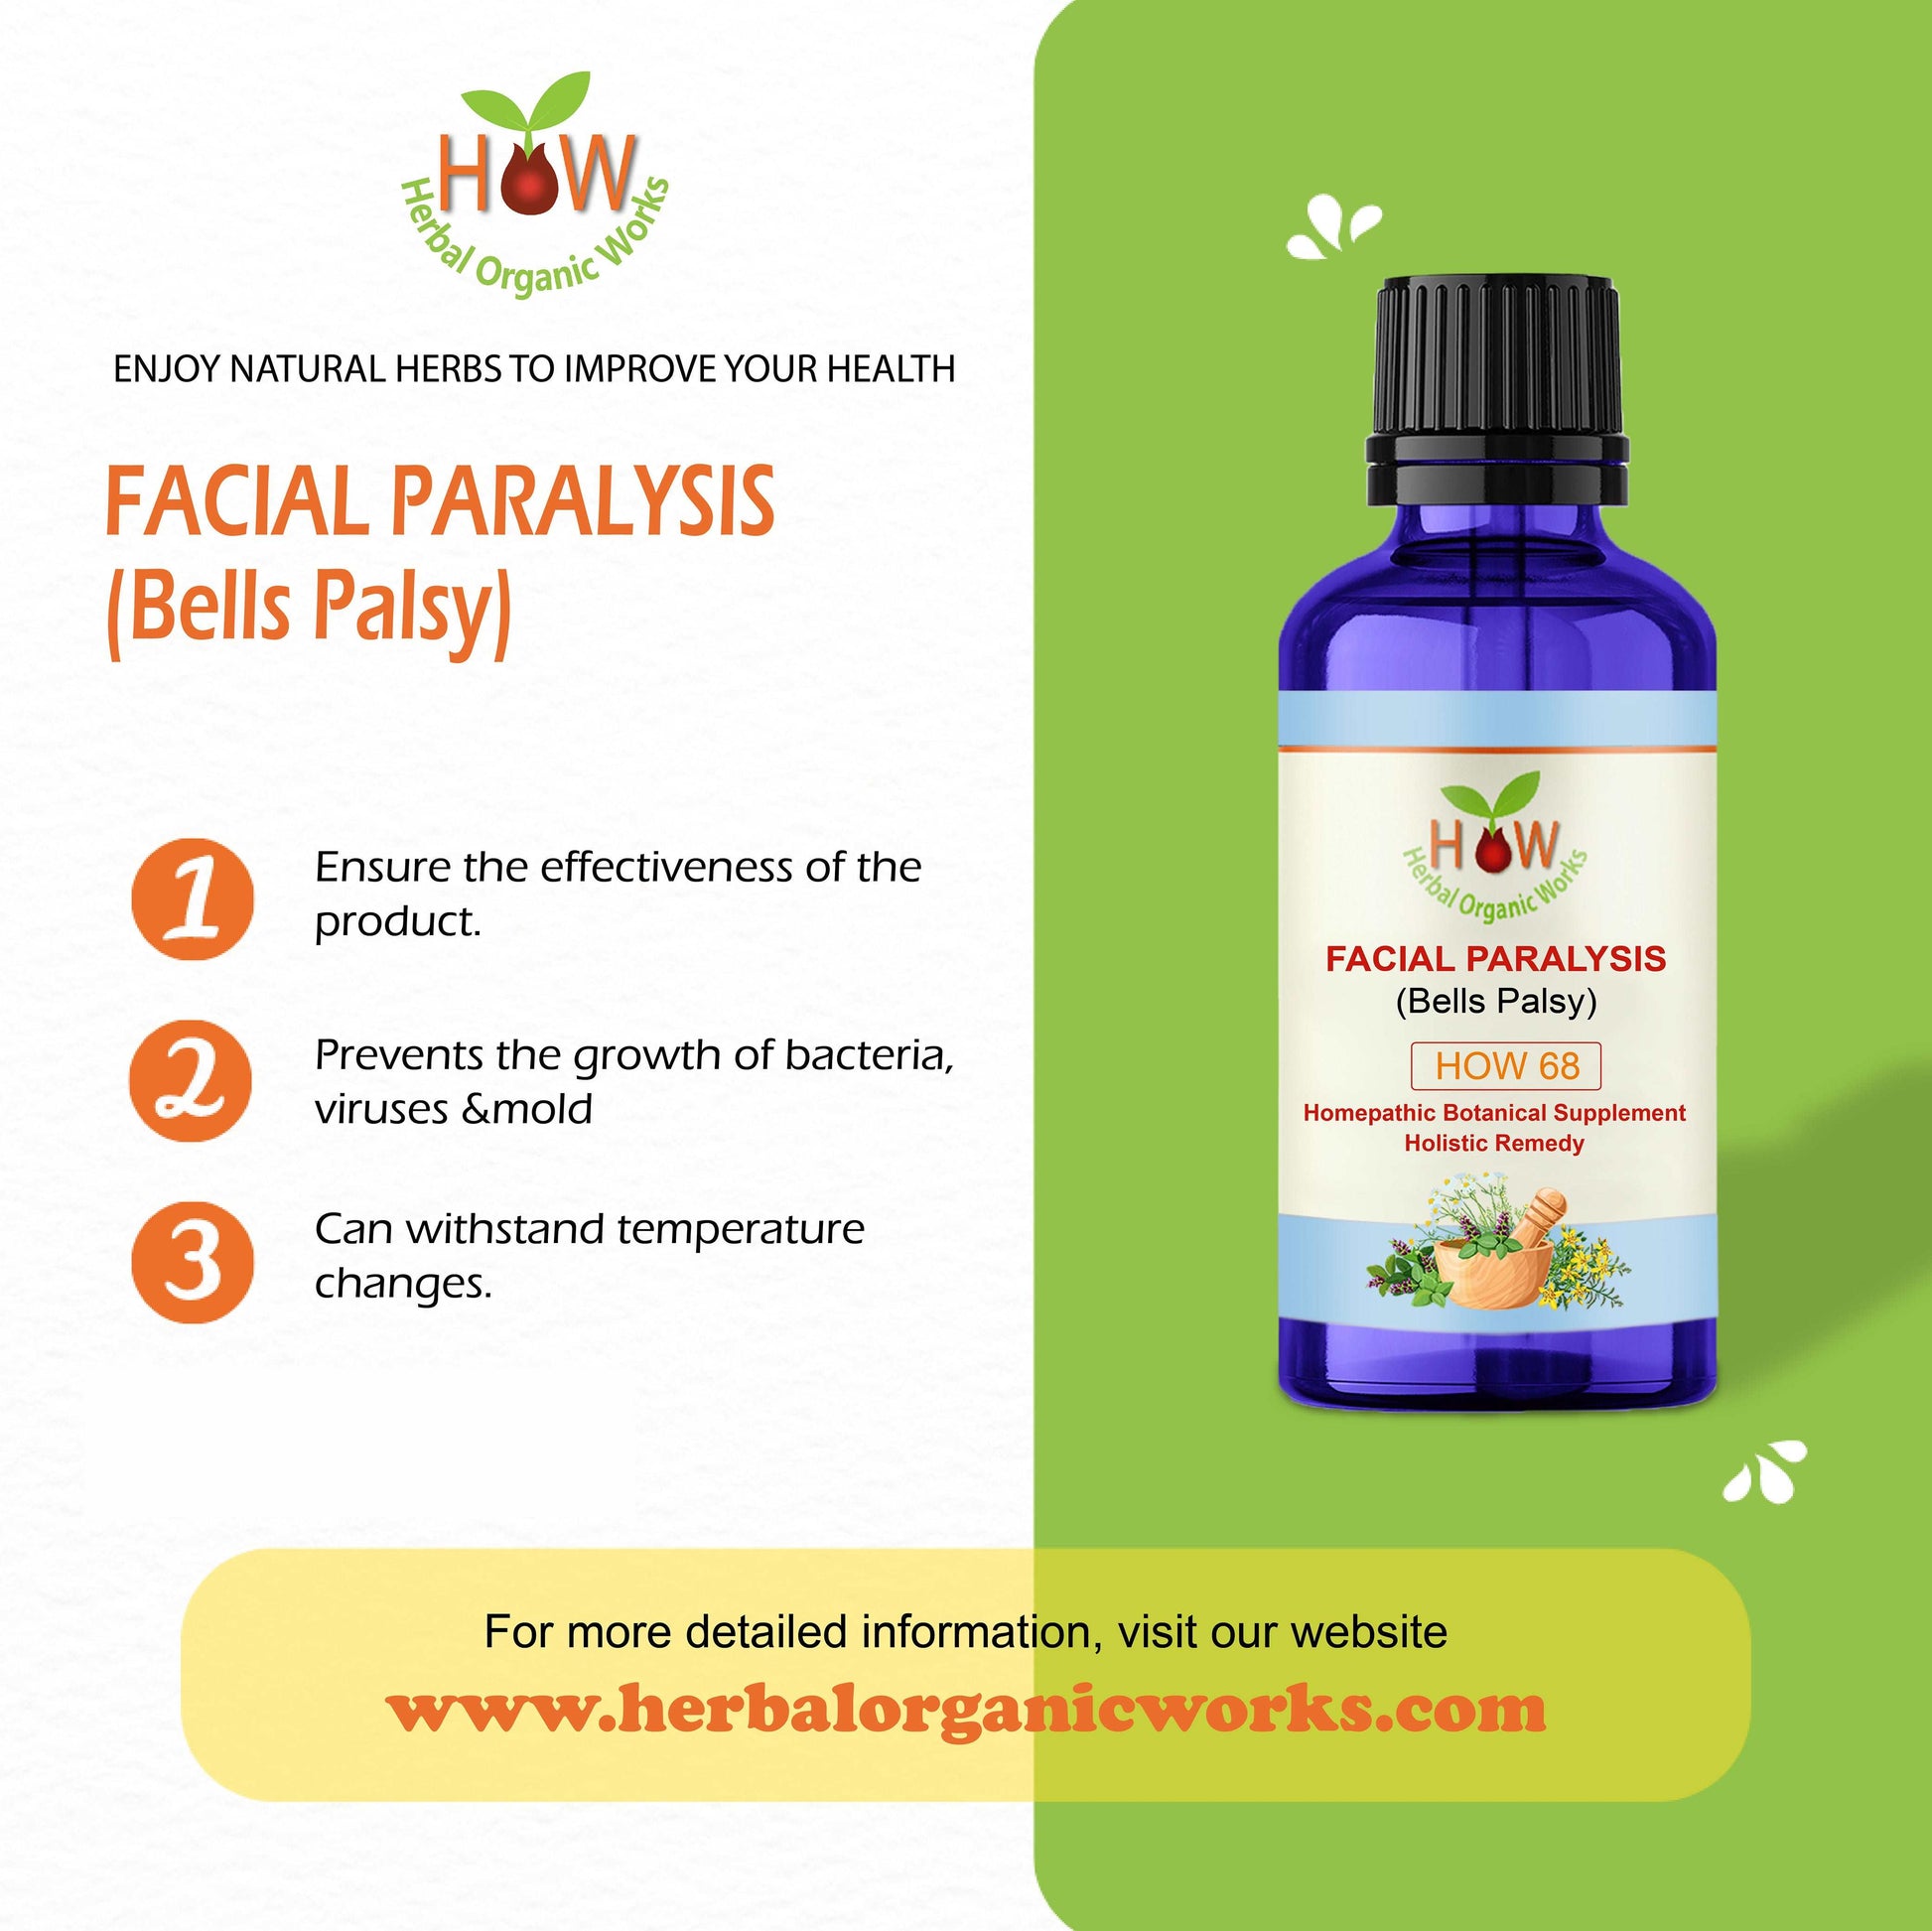 FACIAL PARALYSIS (BELL'S PASLY) HOW68